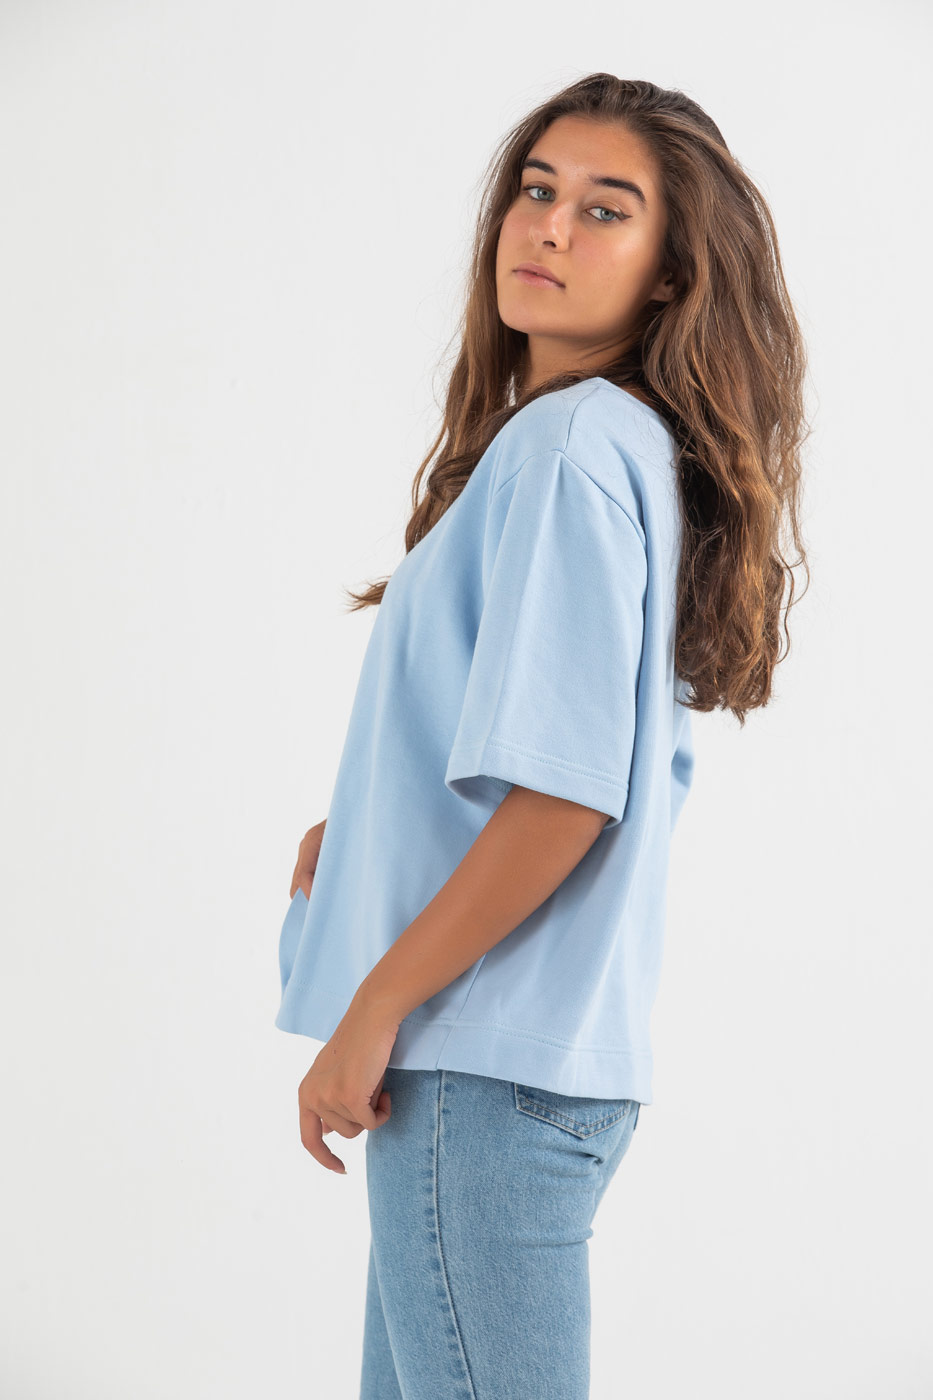 Shop now from Dresscode - Pretty Basic Top In Baby Blue